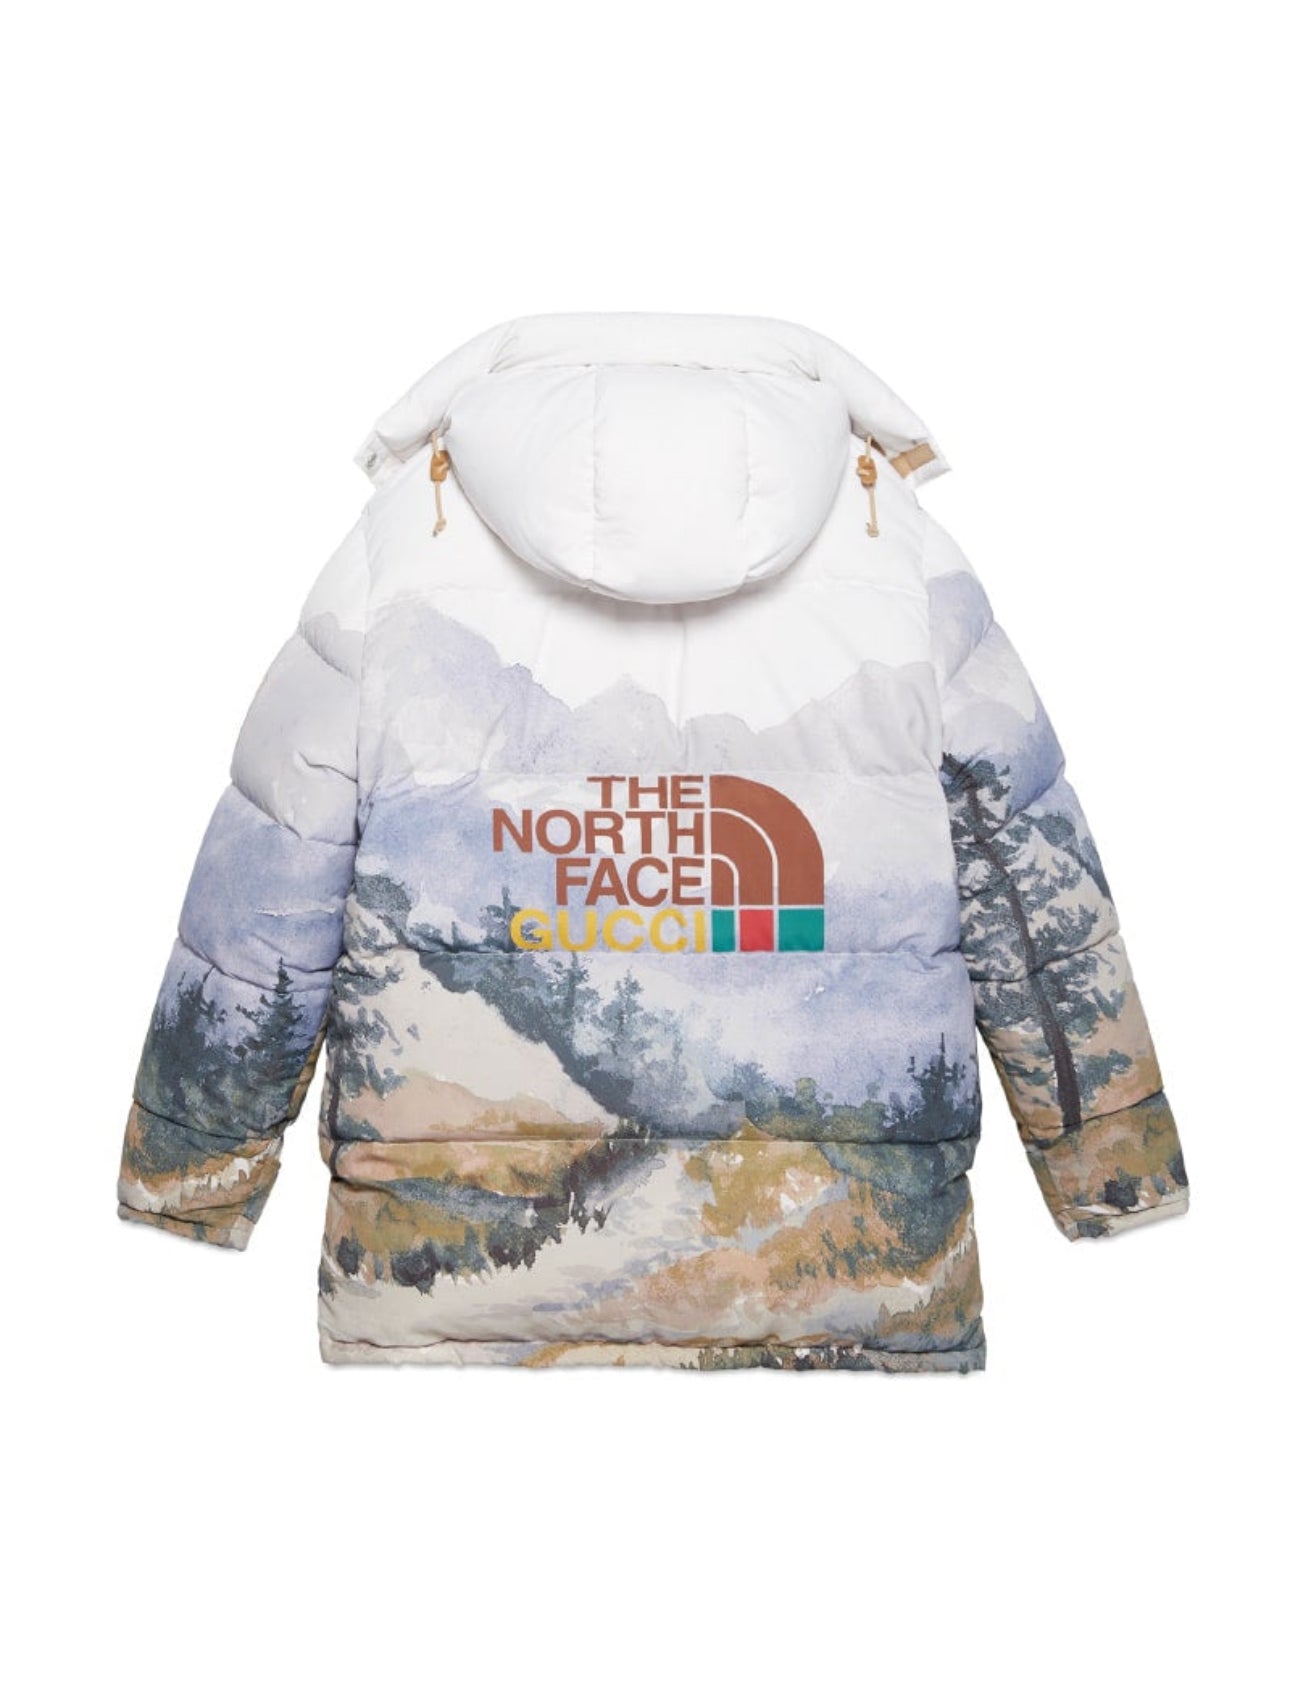 GUCCI x THE NORTH FACE PUFFER JACKET - TRAIL PRINT